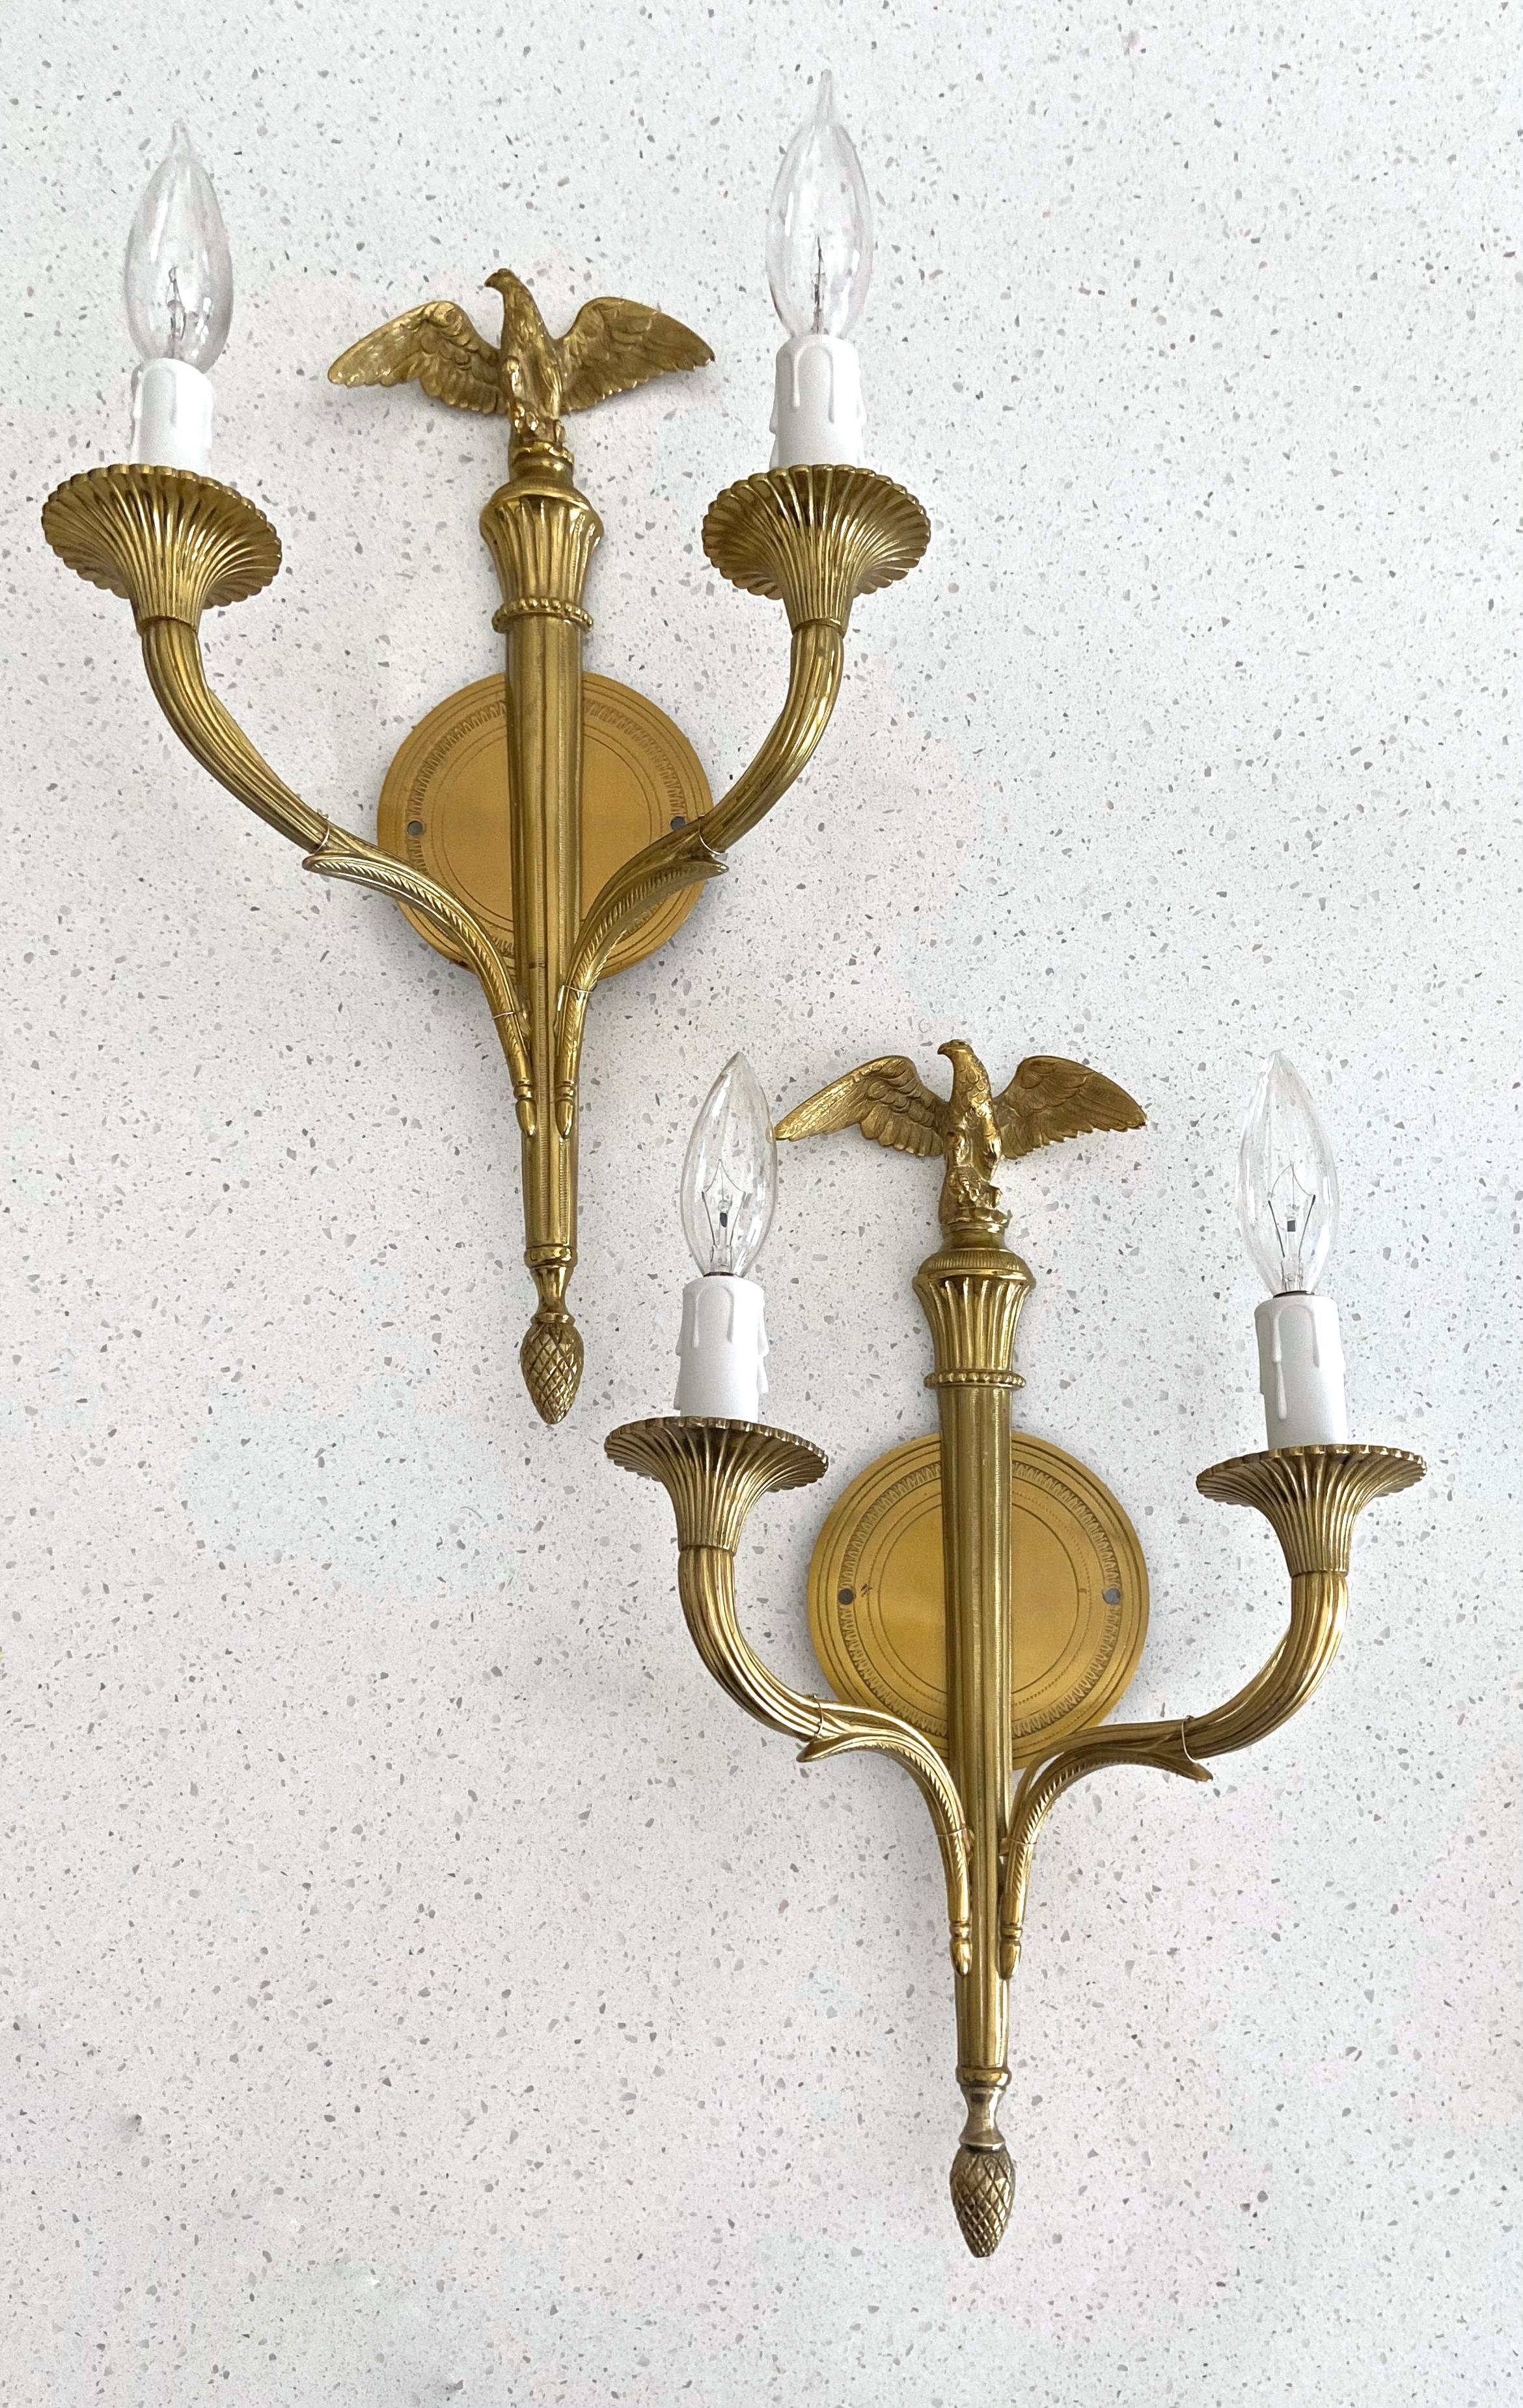 Pair of French Empire style doré gilt bronze wall sconces with eagle motif. The sconces are expertly crafted with fine detailing throughout. Each uses 2 candelabra size bulbs, newly wired (backplate 4.5